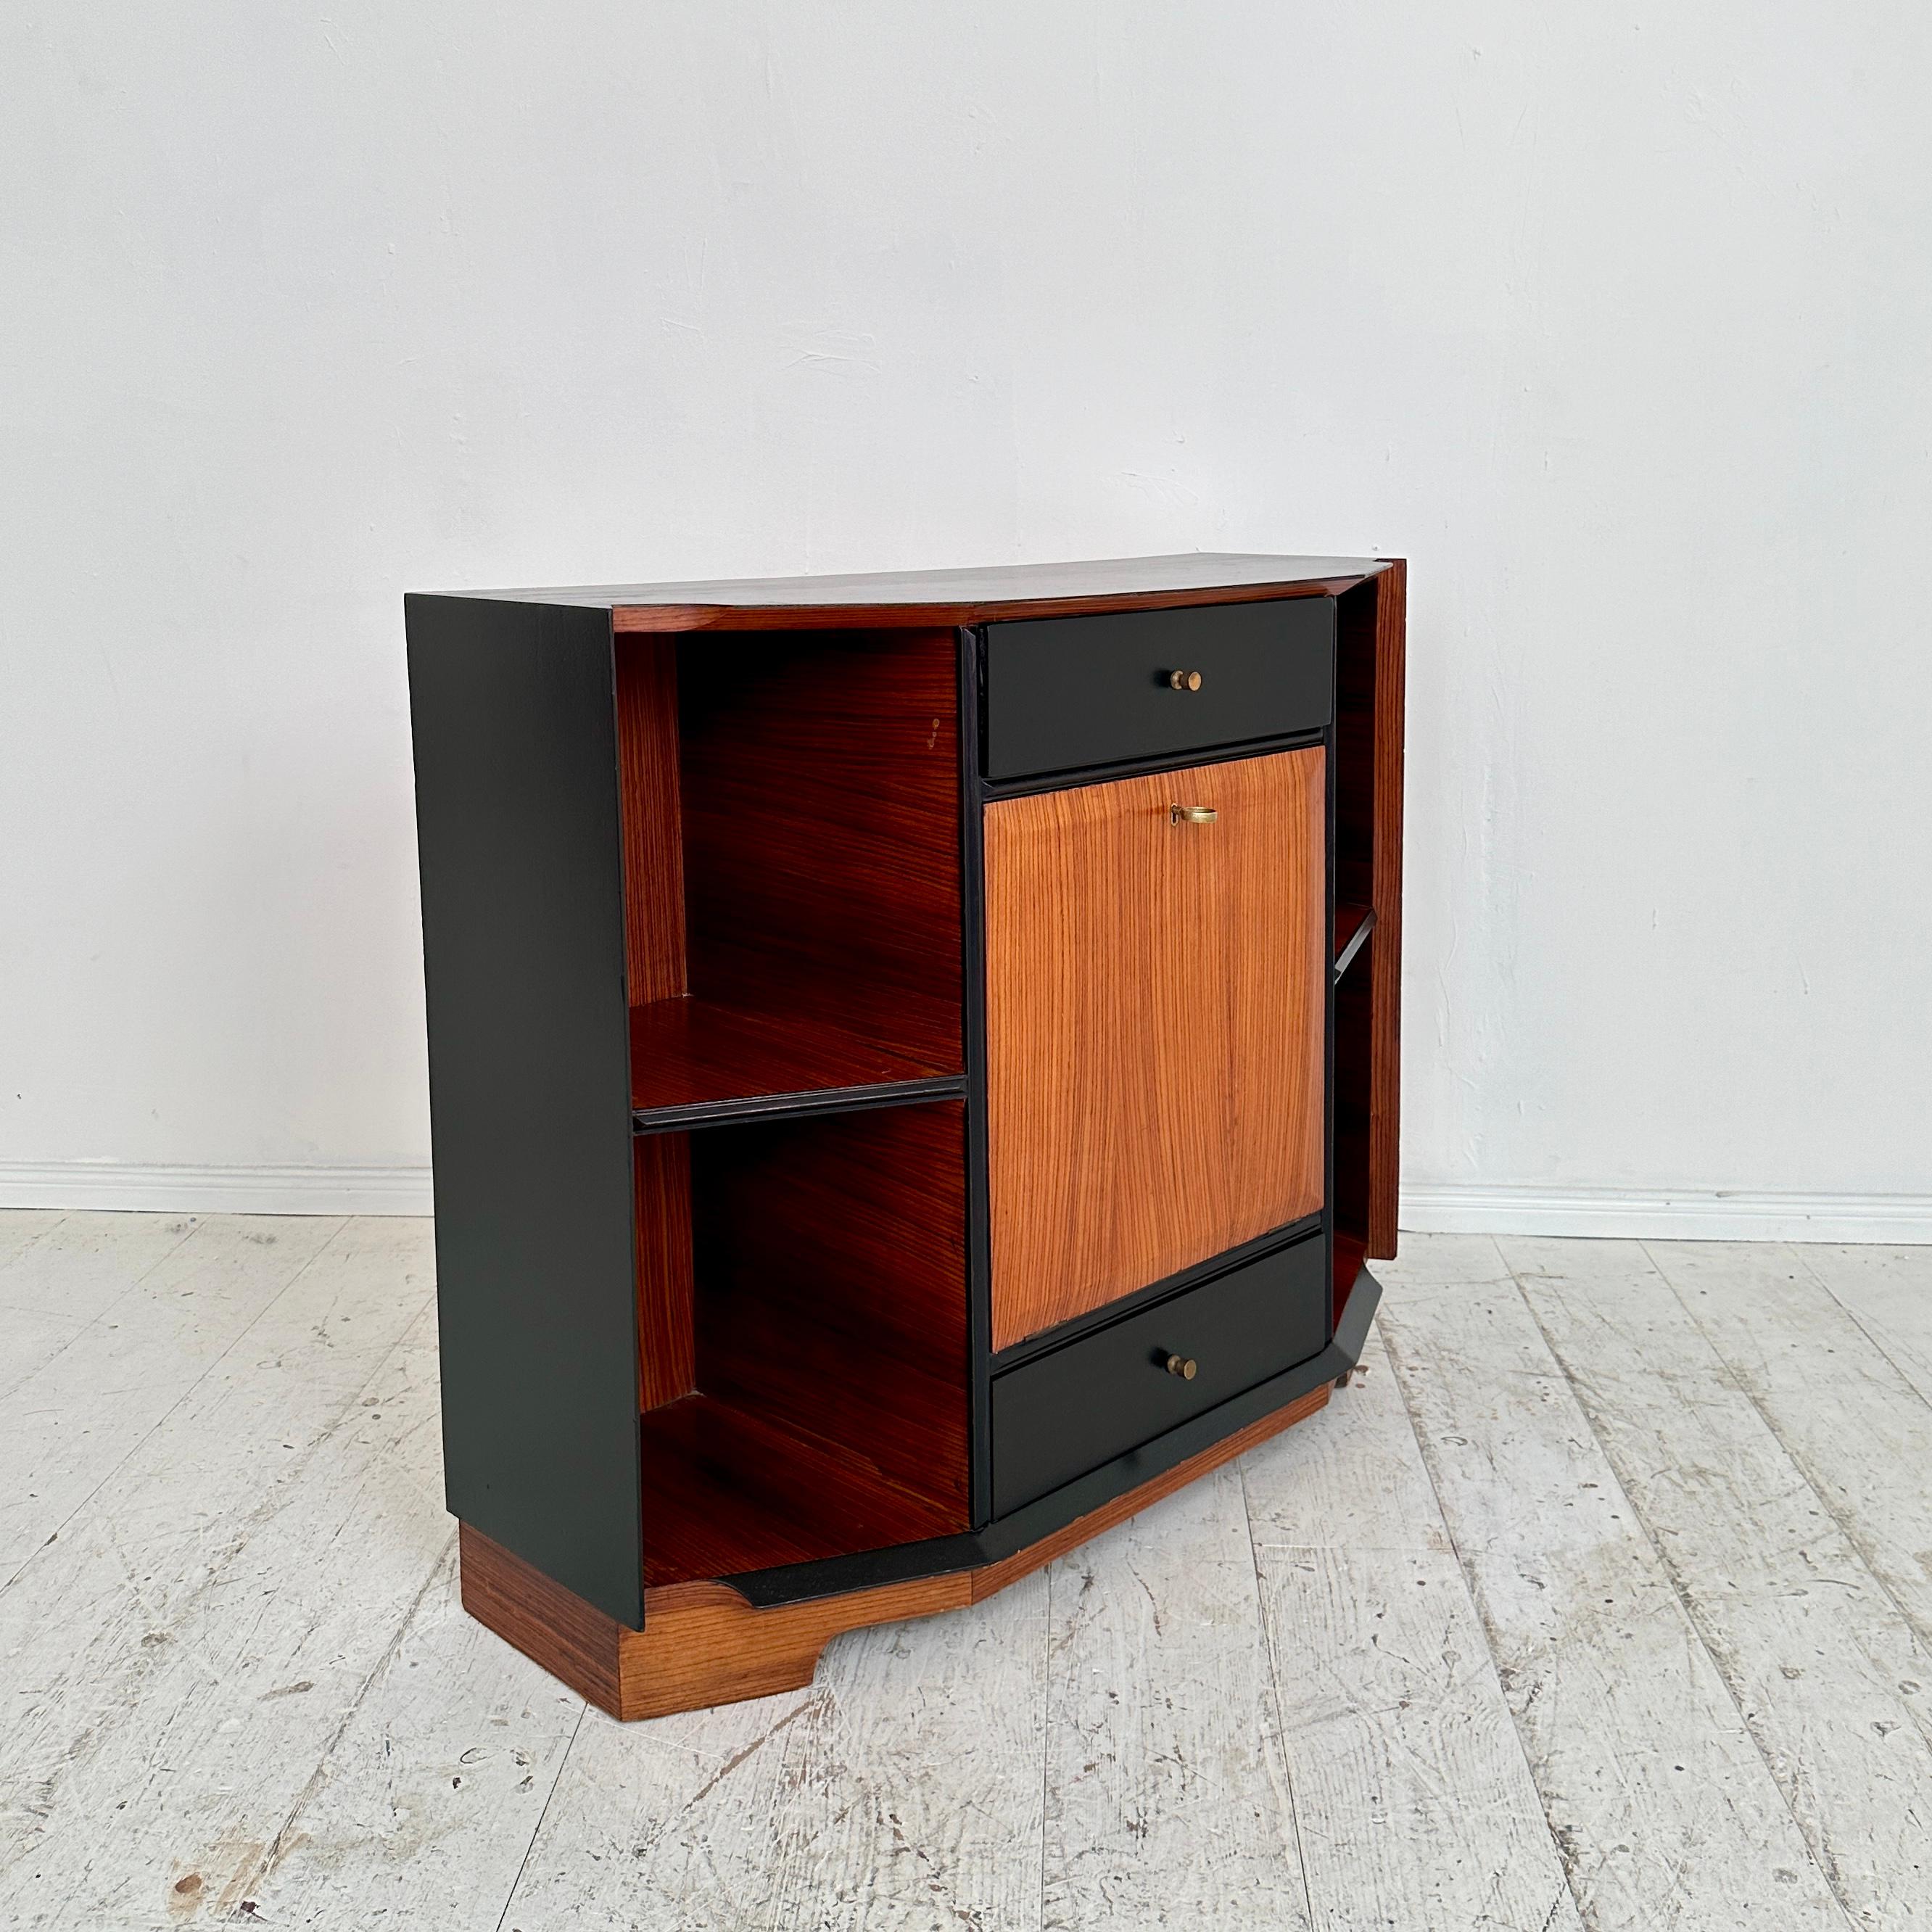 Experience the timeless elegance of mid-century Italian craftsmanship with this exquisite bar cabinet crafted around 1950. Meticulously fashioned from Zebrano wood and adorned with sleek black lacquer accents, it epitomizes sophistication and